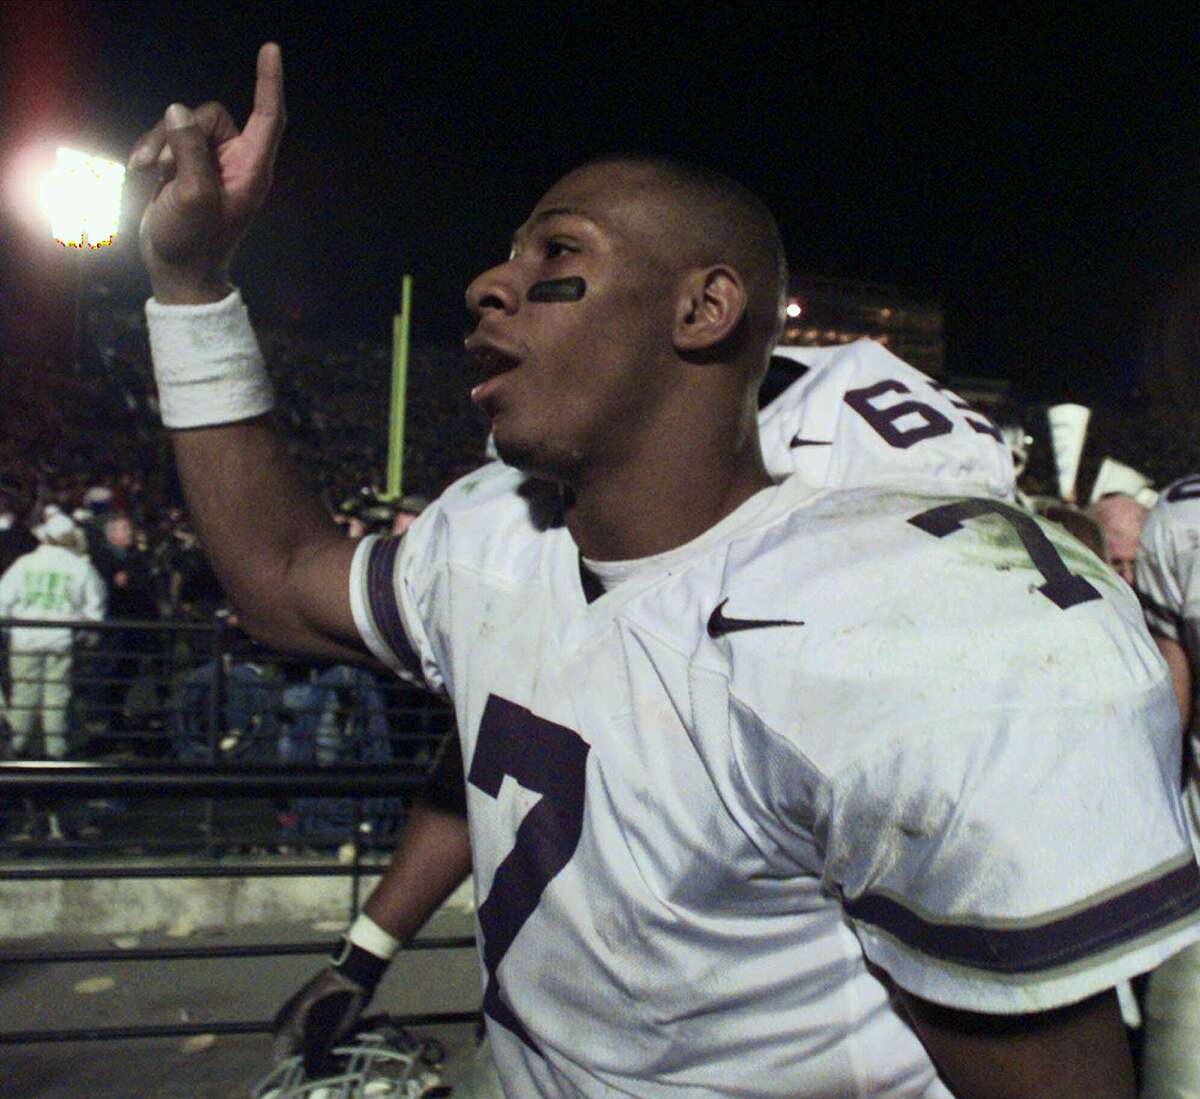 Kansas State Wildcats' quarterback Michael Bishop (7) signals number one to fans as he leaves the field following their 31-25 victory over the University of Missouri Saturday, Nov. 21, 1998 in Columbia, Mo. Kansas State (11-0, 8-0) is heading to the Big 12 championship game Dec. 5 against Texas A&M, where it will be shooting for its 20th straight victory.